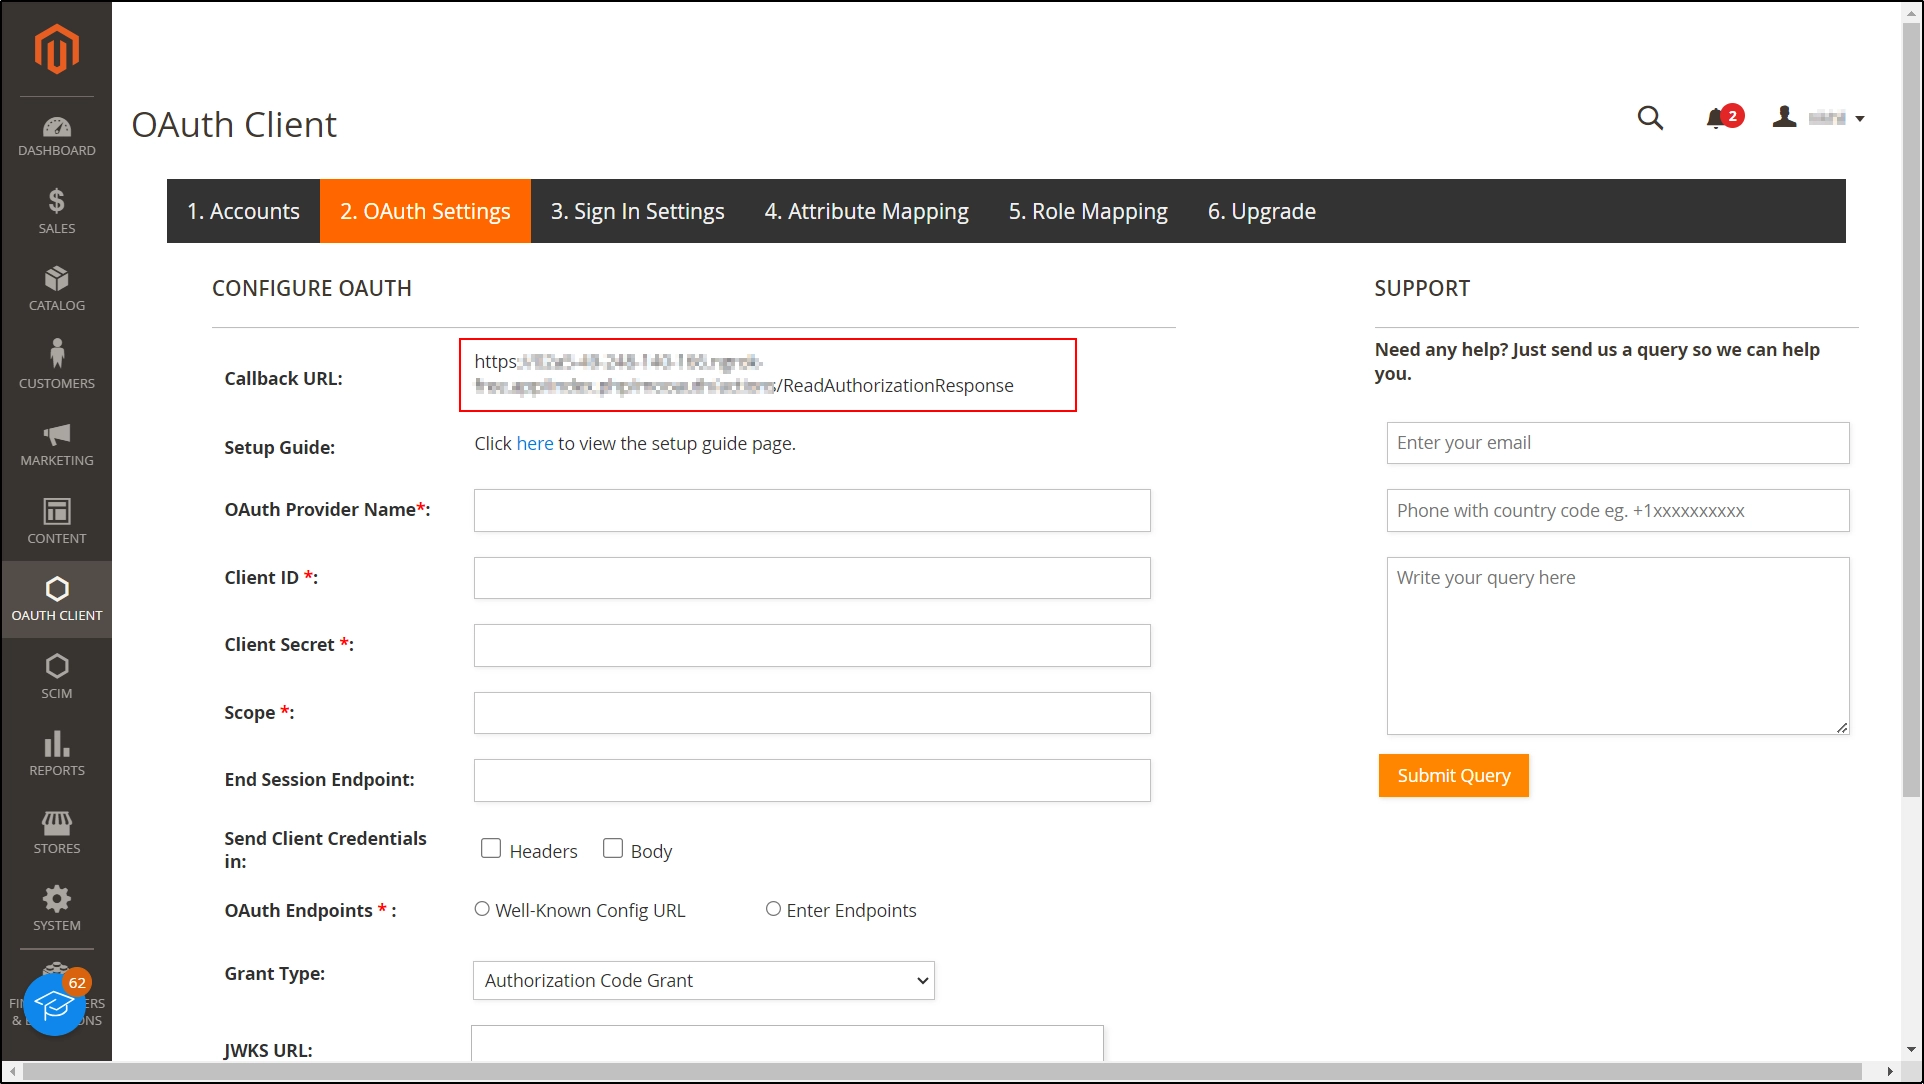 Install and activated the miniOrange OAuth Client plugin in Magento E-commerce - Copy Callback URL